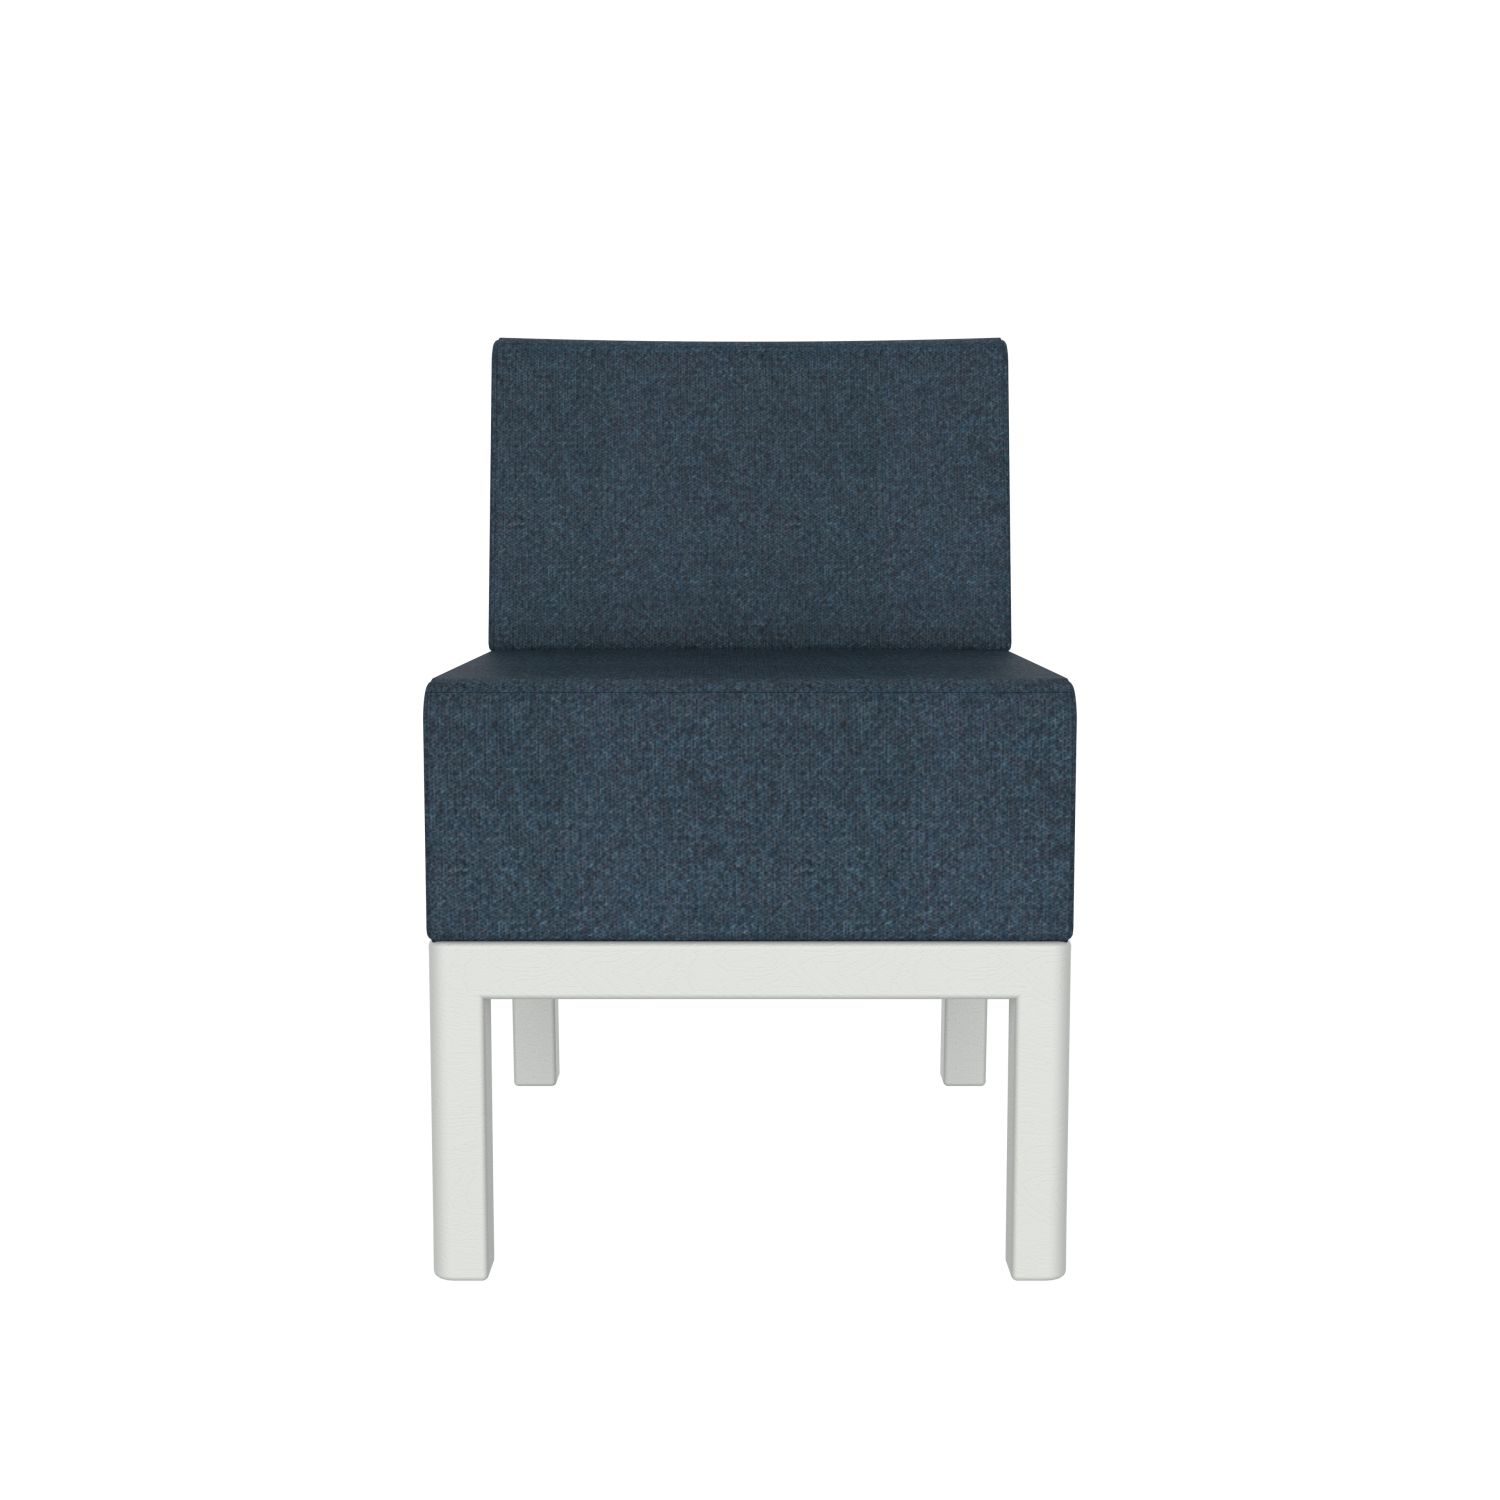 lensvelt piet boon chair 01 without armrests moss night blue 45 price level 2 light grey ral7035 hard leg ends